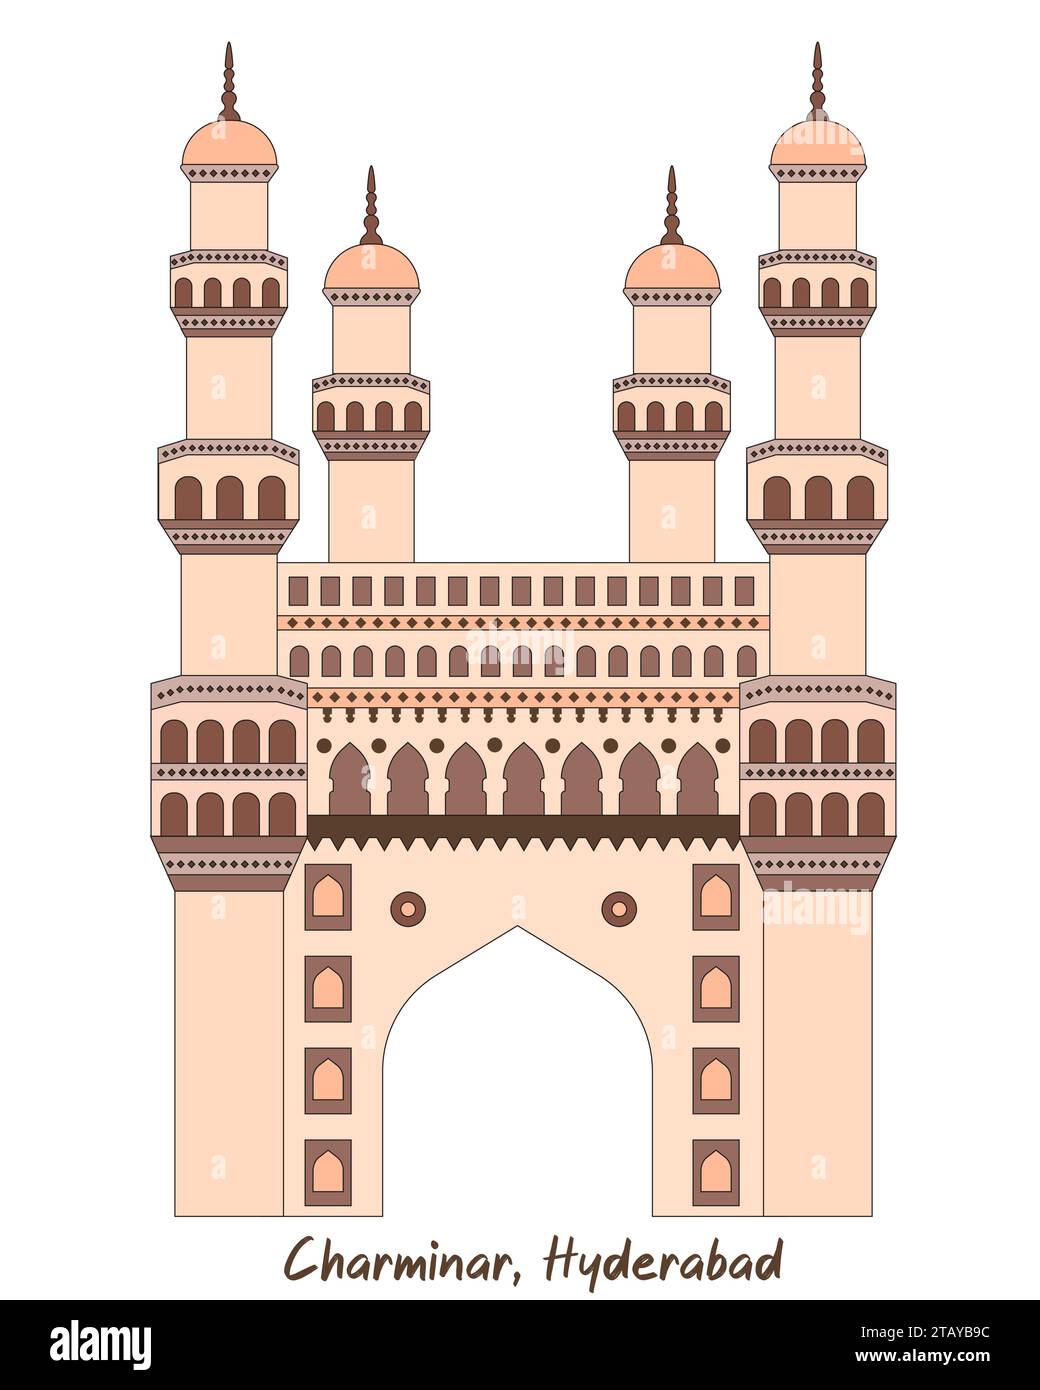 Vector illustration of Charminar , Charminar is a mosque and monument located in Hyderabad, Telangana, India. Stock Vector